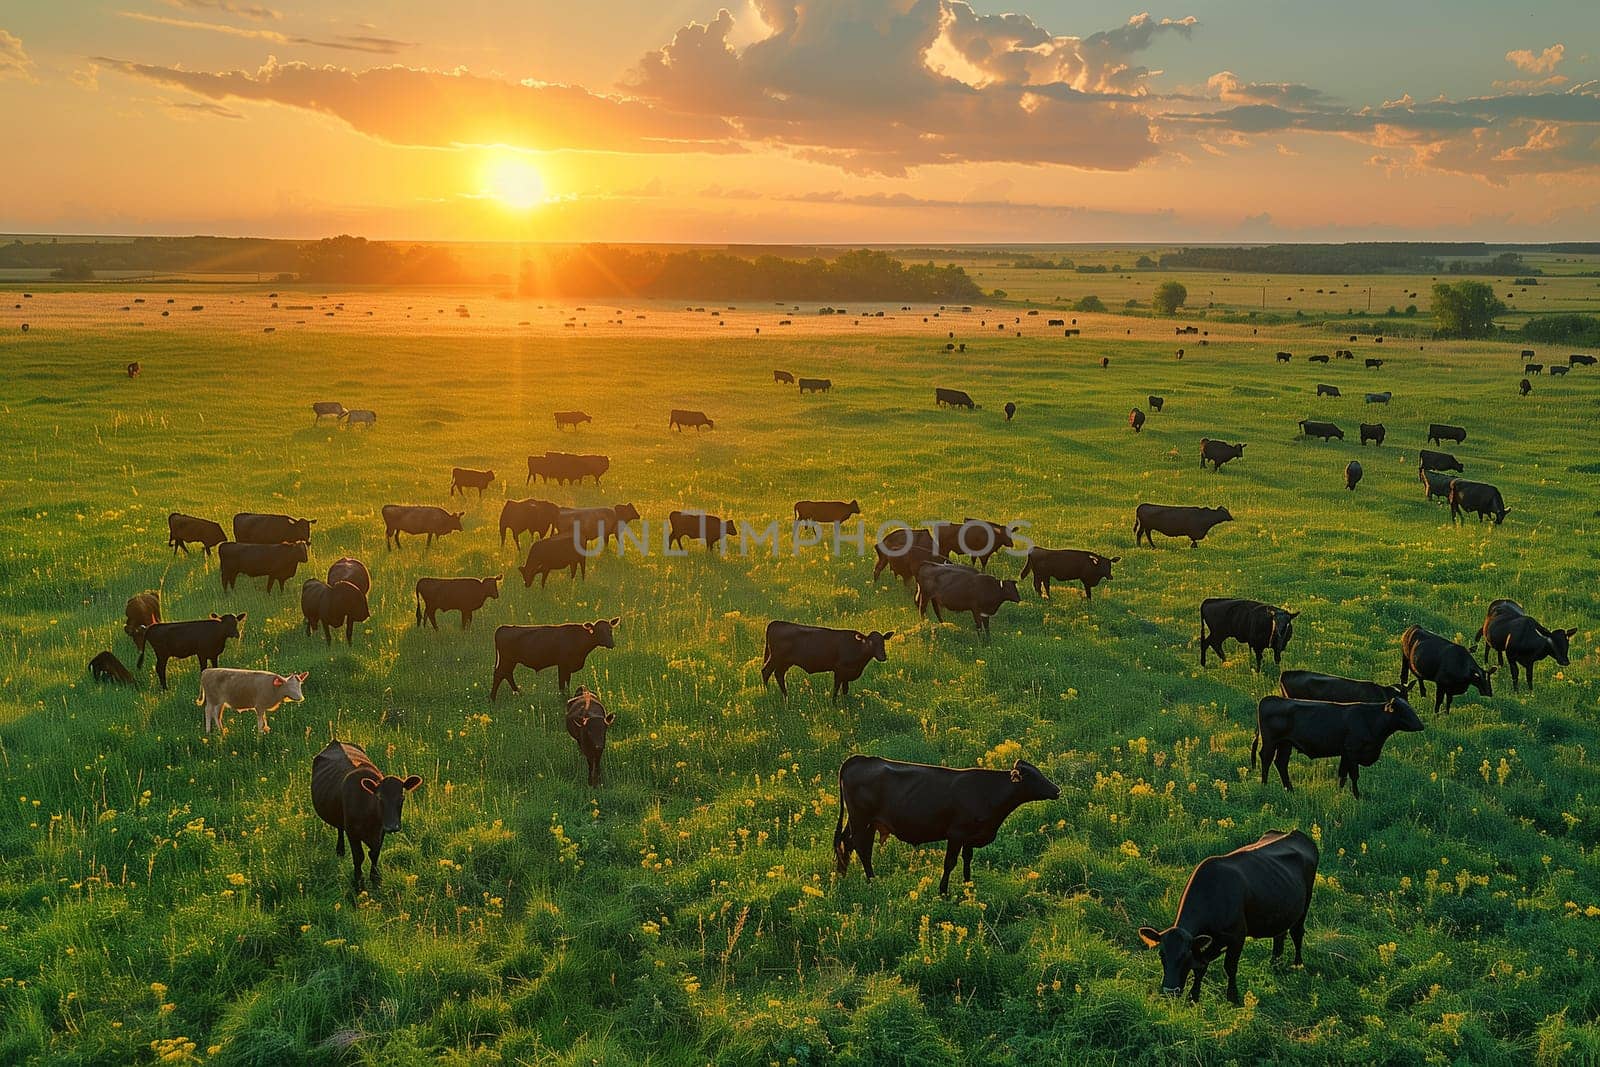 Numerous cattle grazing on a vibrant green field.